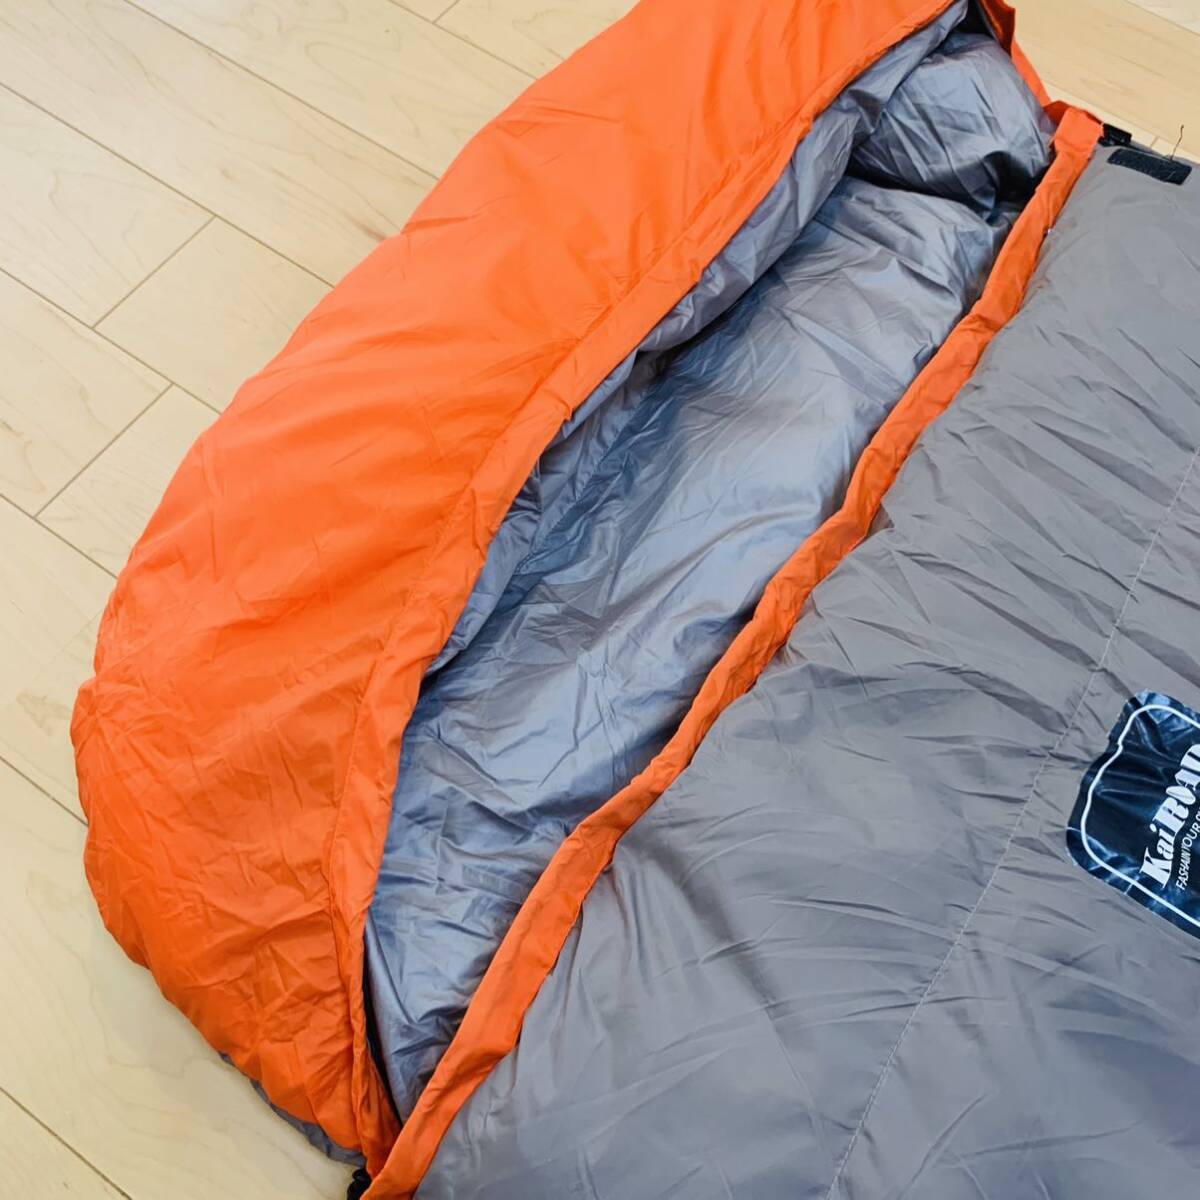  spring autumn outdoor down super high quality envelope type sleeping bag sleeping bag 1500g super light weight thickness . water-repellent most low temperature times -30*C outdoor field mountain climbing sleeping area in the vehicle 210x80cm 2.3kg